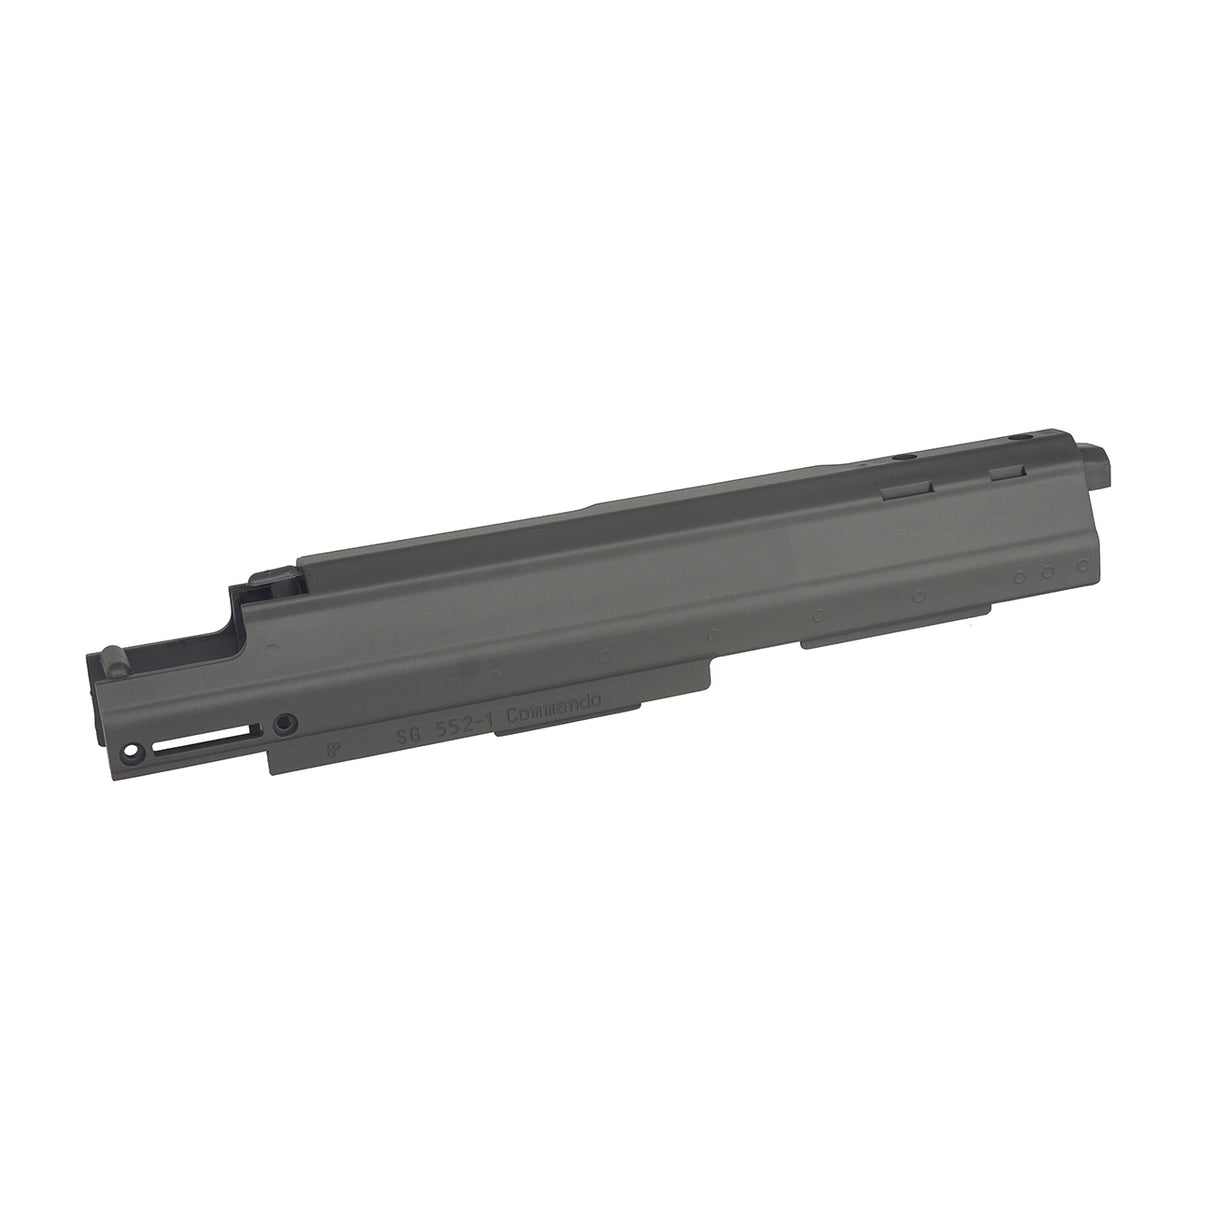 WELL Replacement Upper Receiver for 552 AEG ( WELL-AC010 )